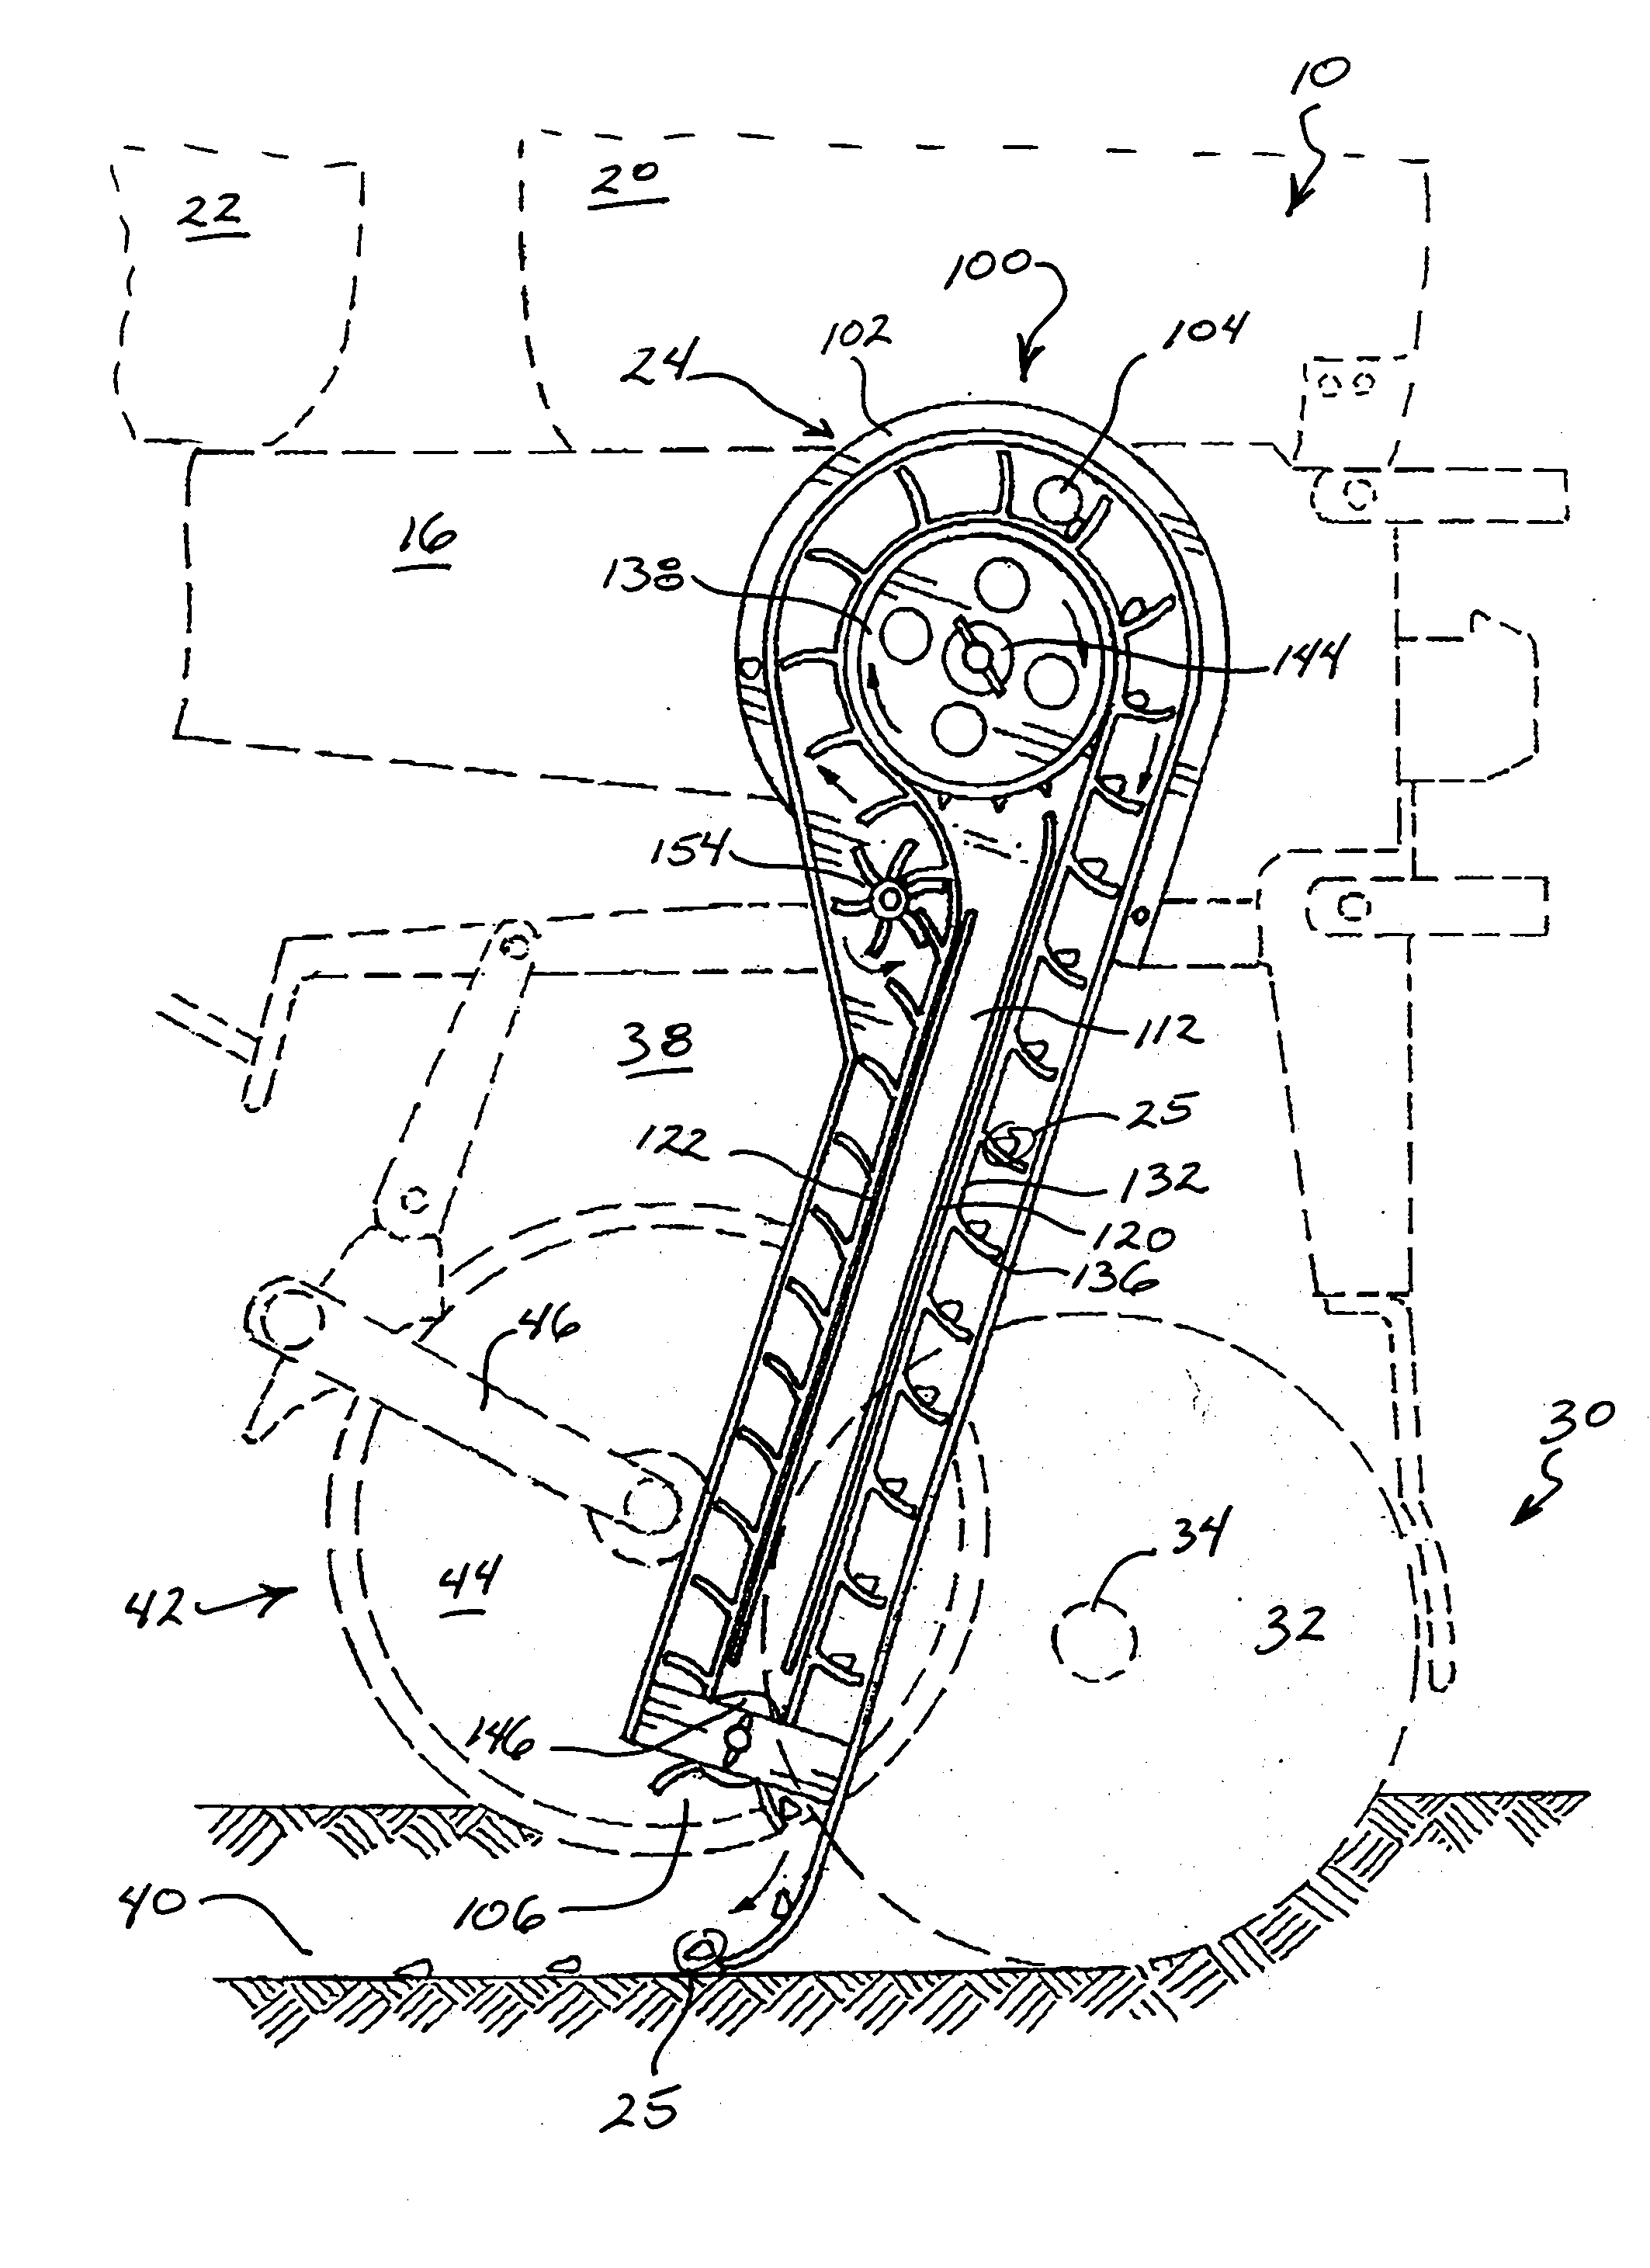 Apparatus and Method for Controlled Delivery of Seeds to an Open Furrow.